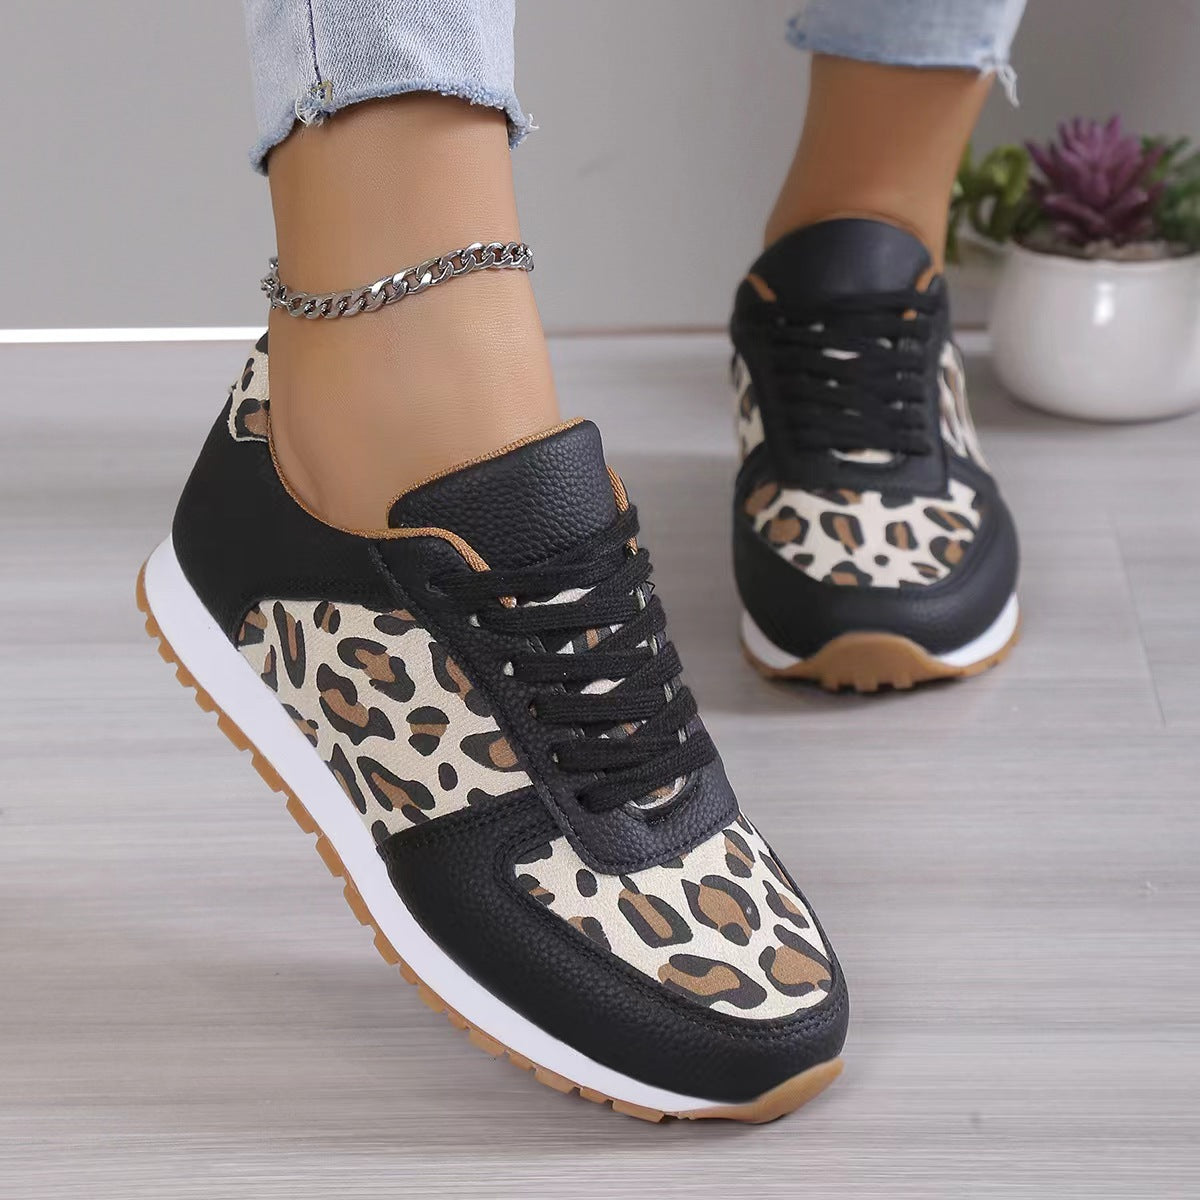 WILKYsWomen ShoesFashion Leopard Print Lace-up Sports Shoes For Women Sneakers Casual RDo you love animal prints and comfortable shoes? If so, you will adore the Fashion Leopard Print Lace-up Sports Shoes from wilkysfitness.com!
These shoes are not onl